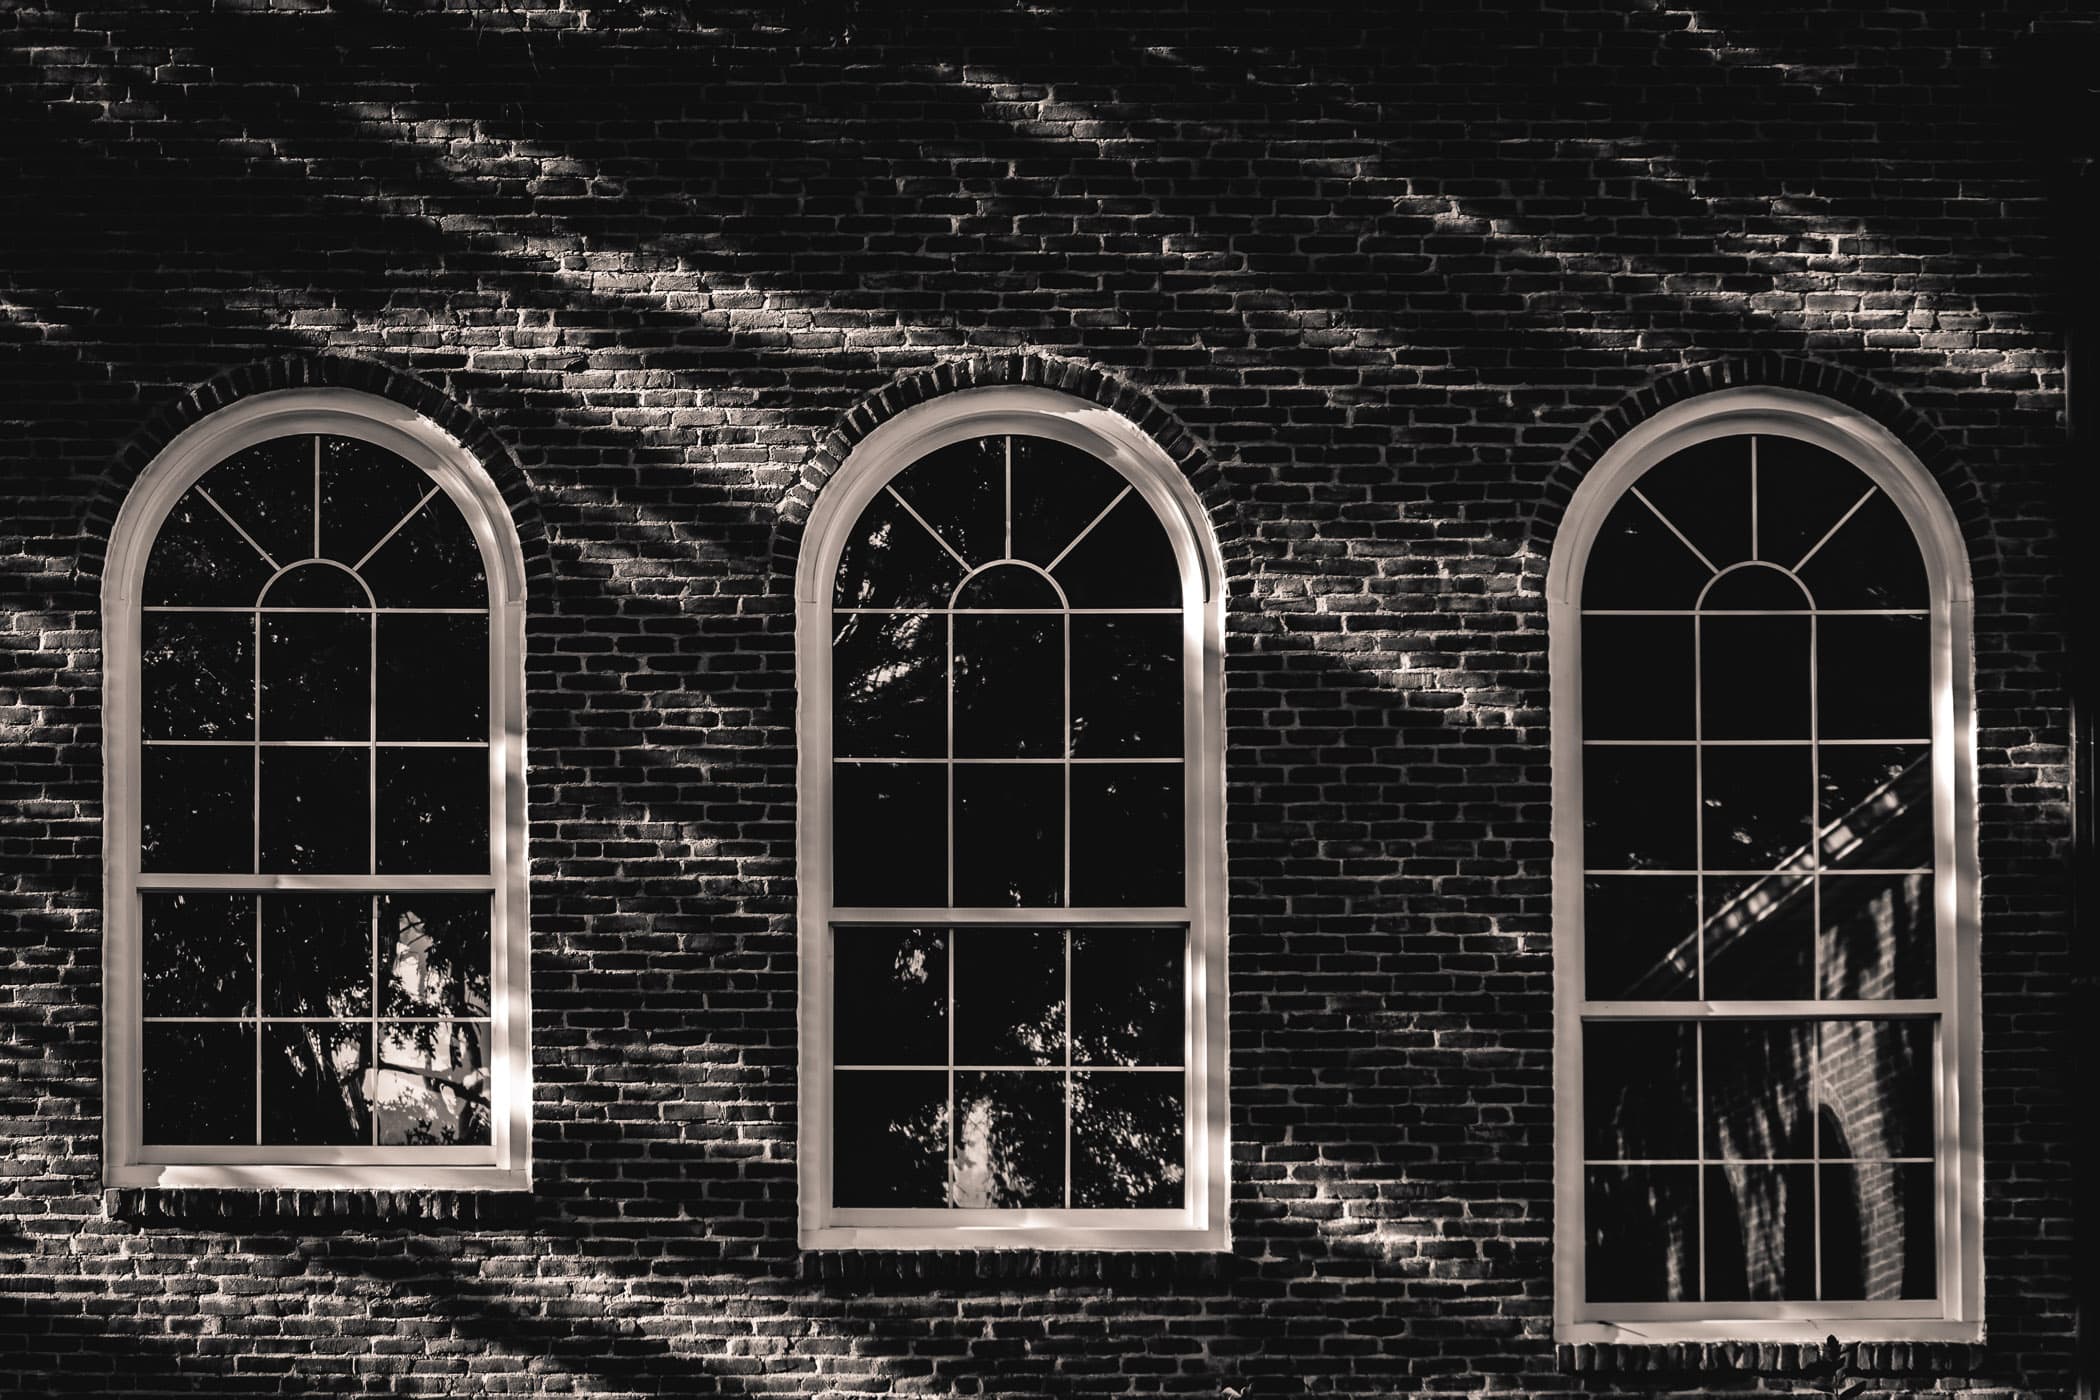 A trio of windows spotted on the campus of Tyler Junior College, Tyler, Texas.